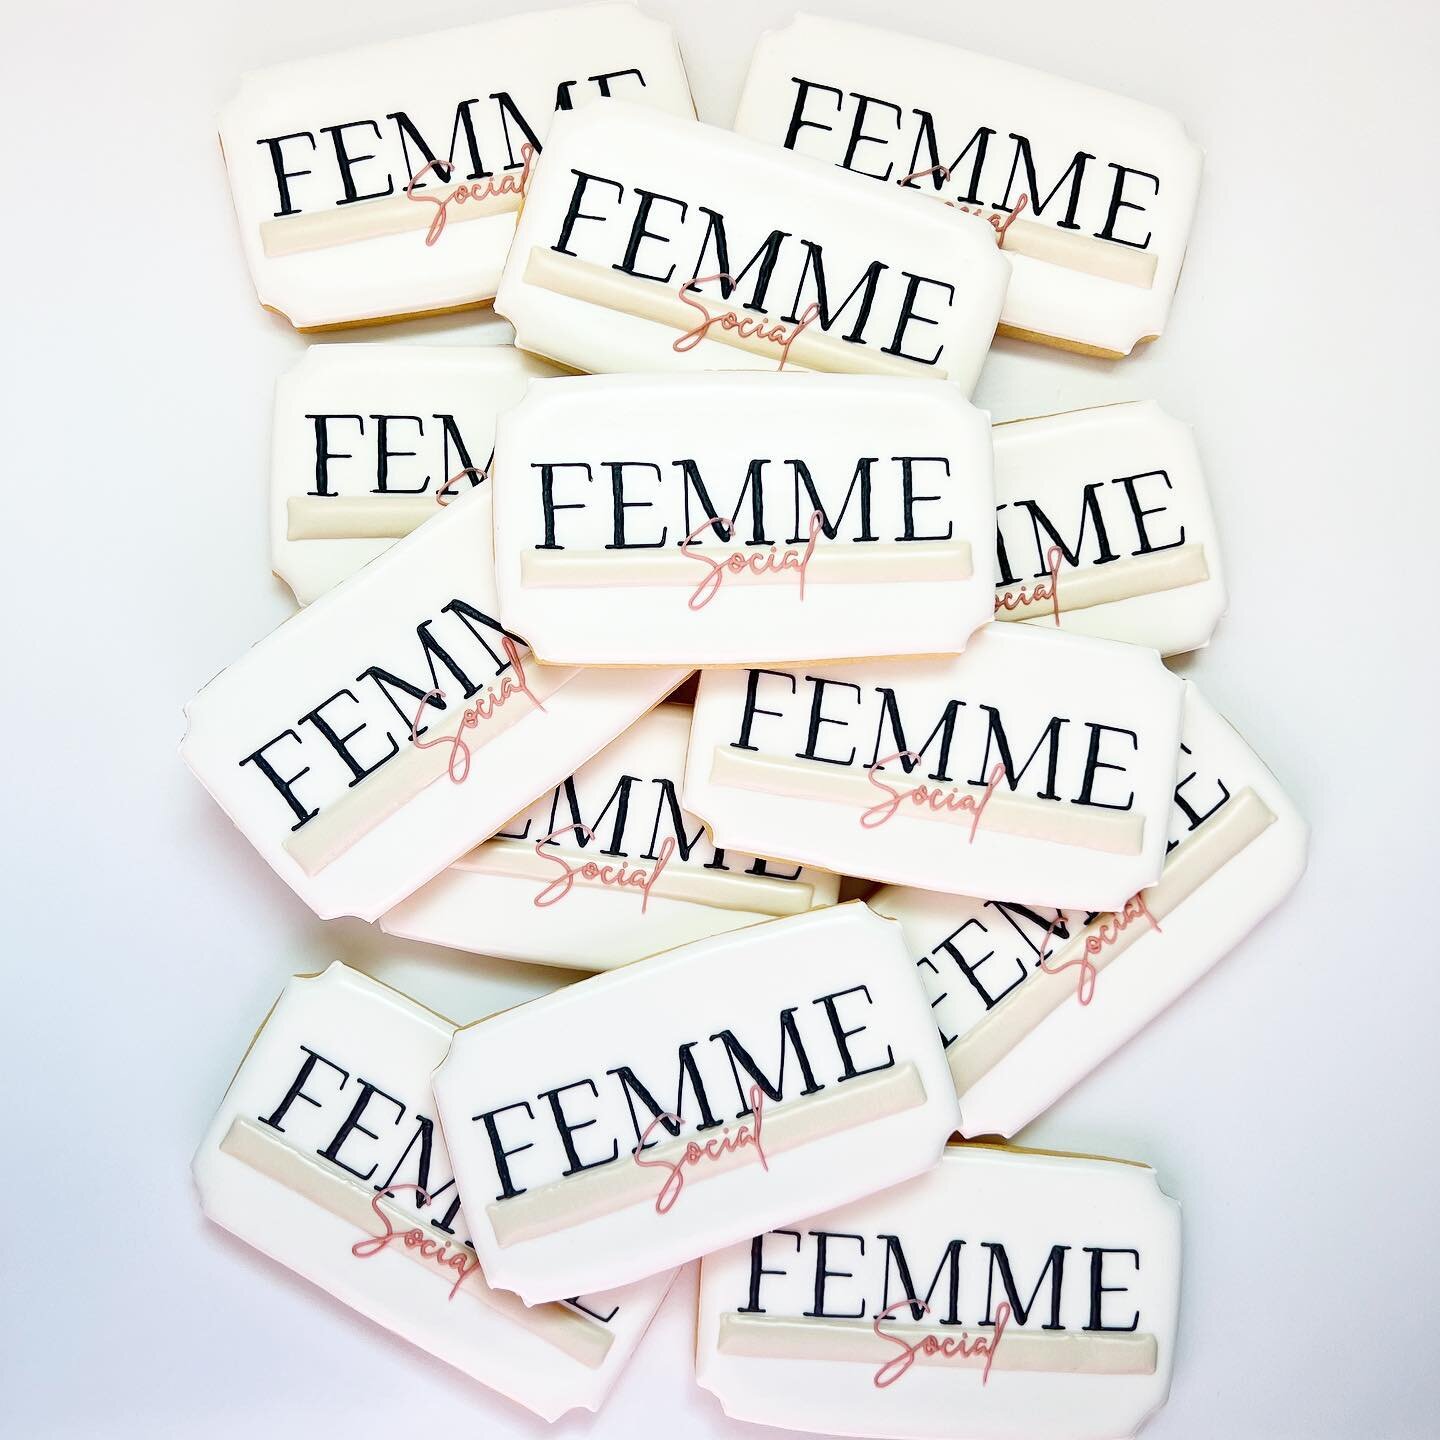 @femmesocialmastermind 

I had the pleasure of making these cookies for an amazing organization I&rsquo;m a part of. Femme Social is a group of a female entrepreneurs that meet monthly to connect and learn. If you&rsquo;re interest in joining contact